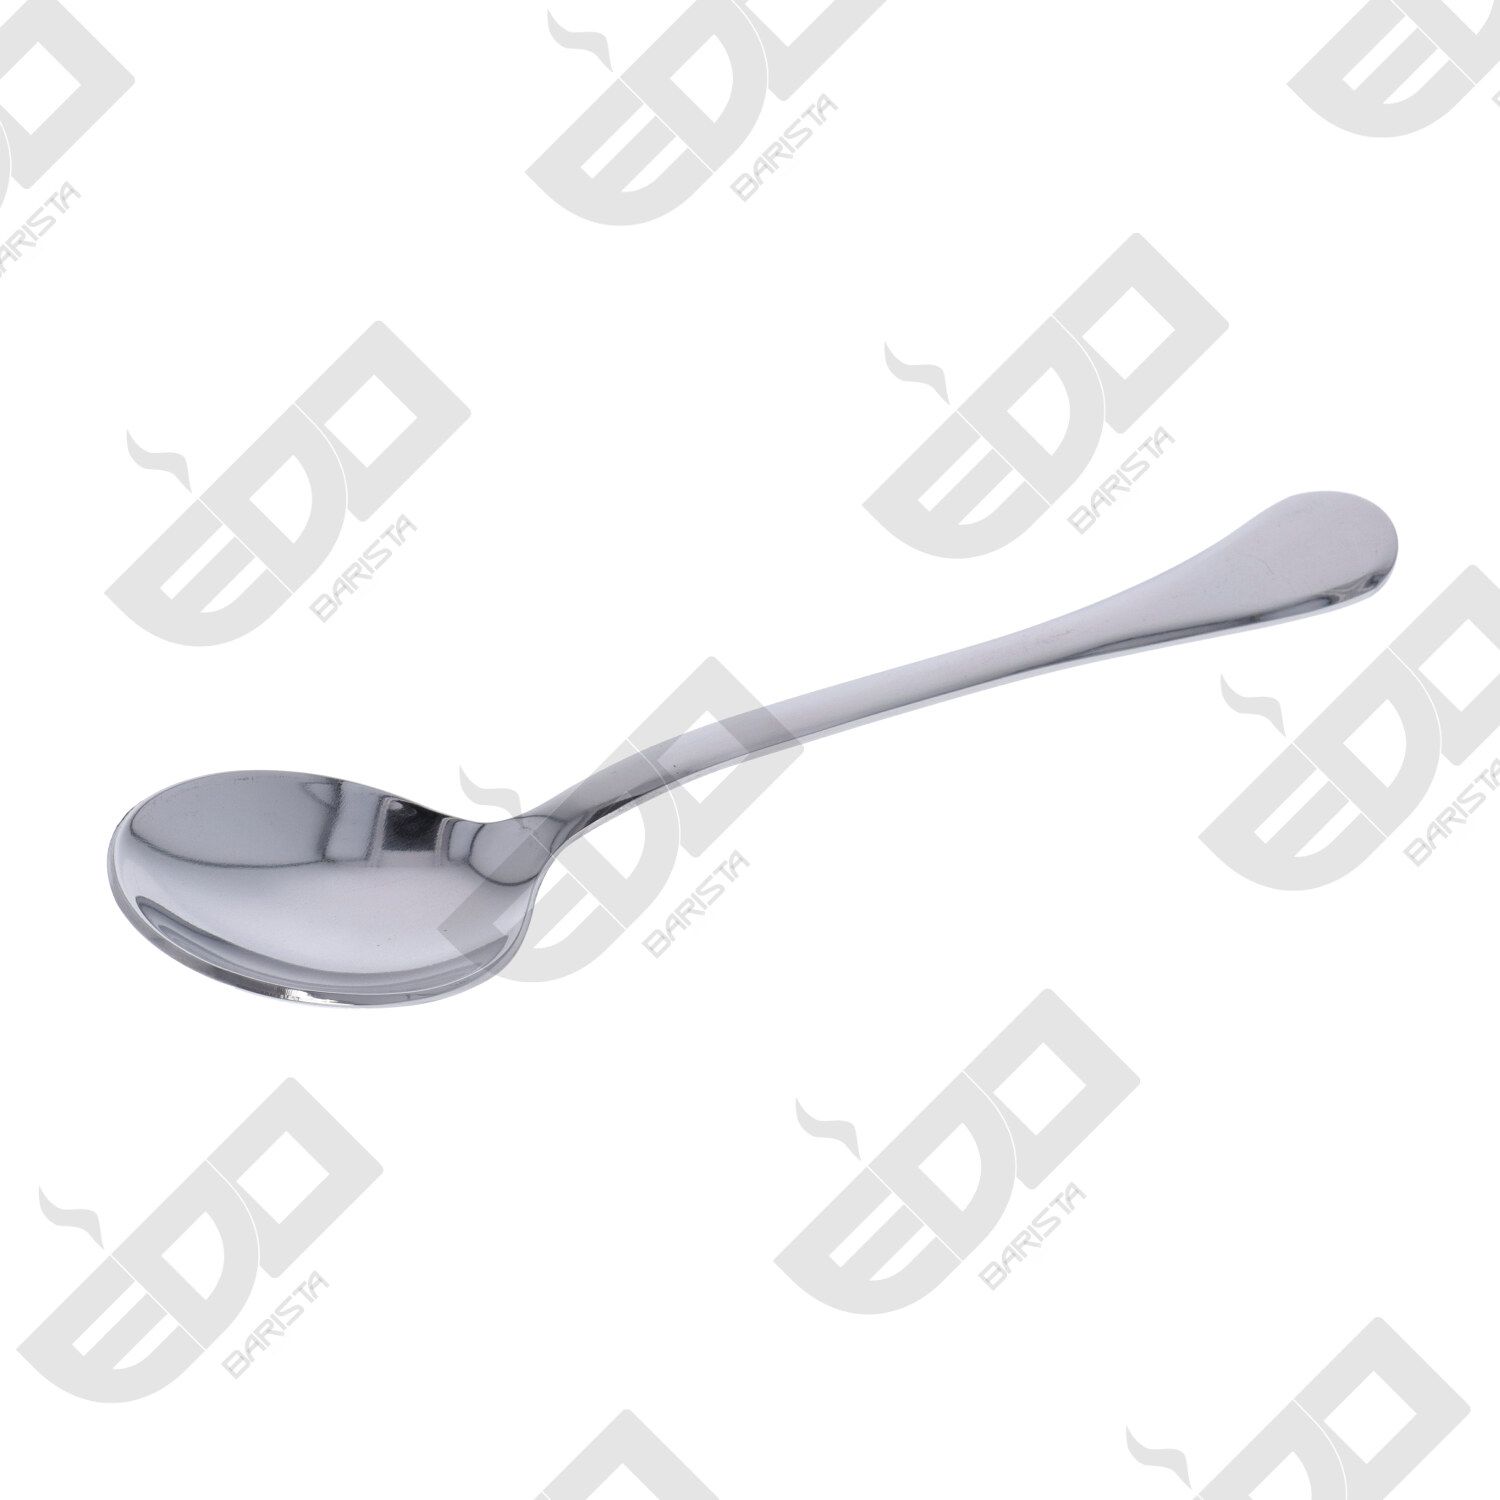 SPOON FOR CUP TESTING